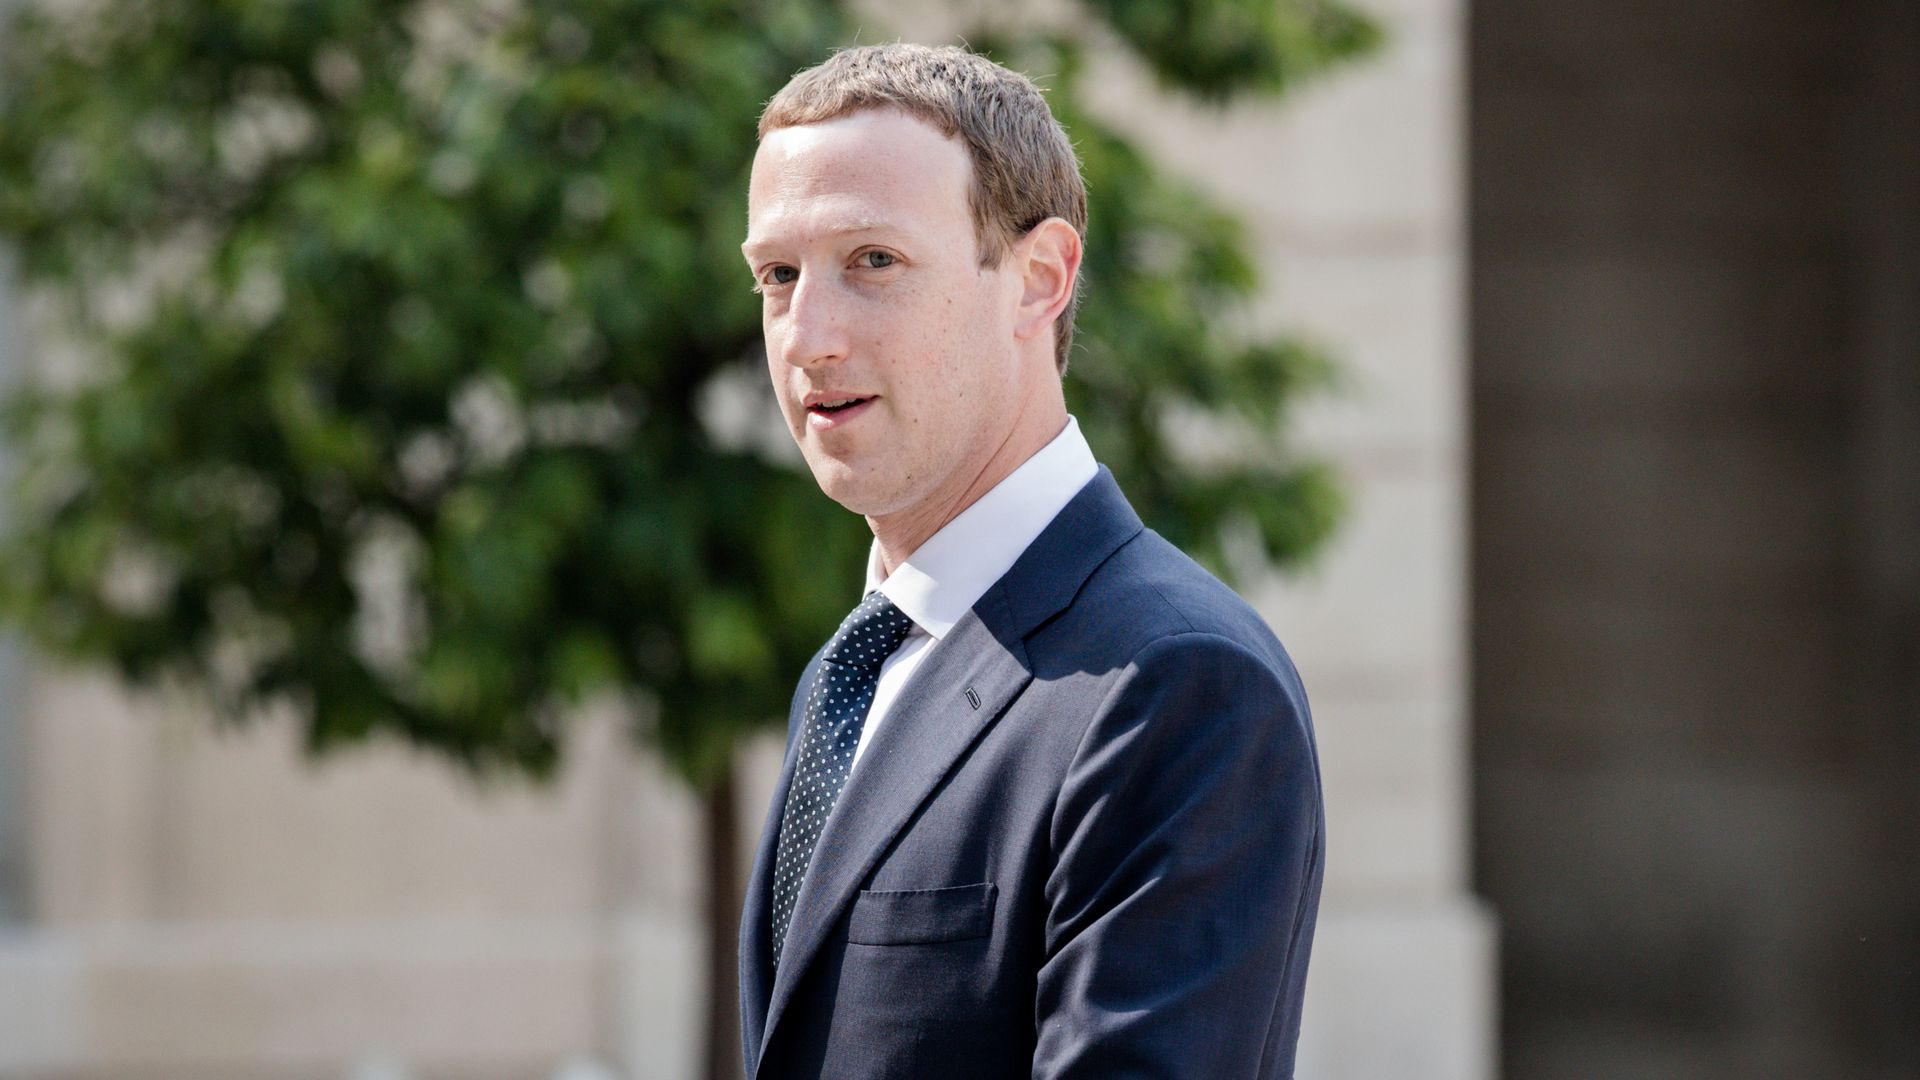 Mark Zuckerberg, photographed outside and wearing a suit